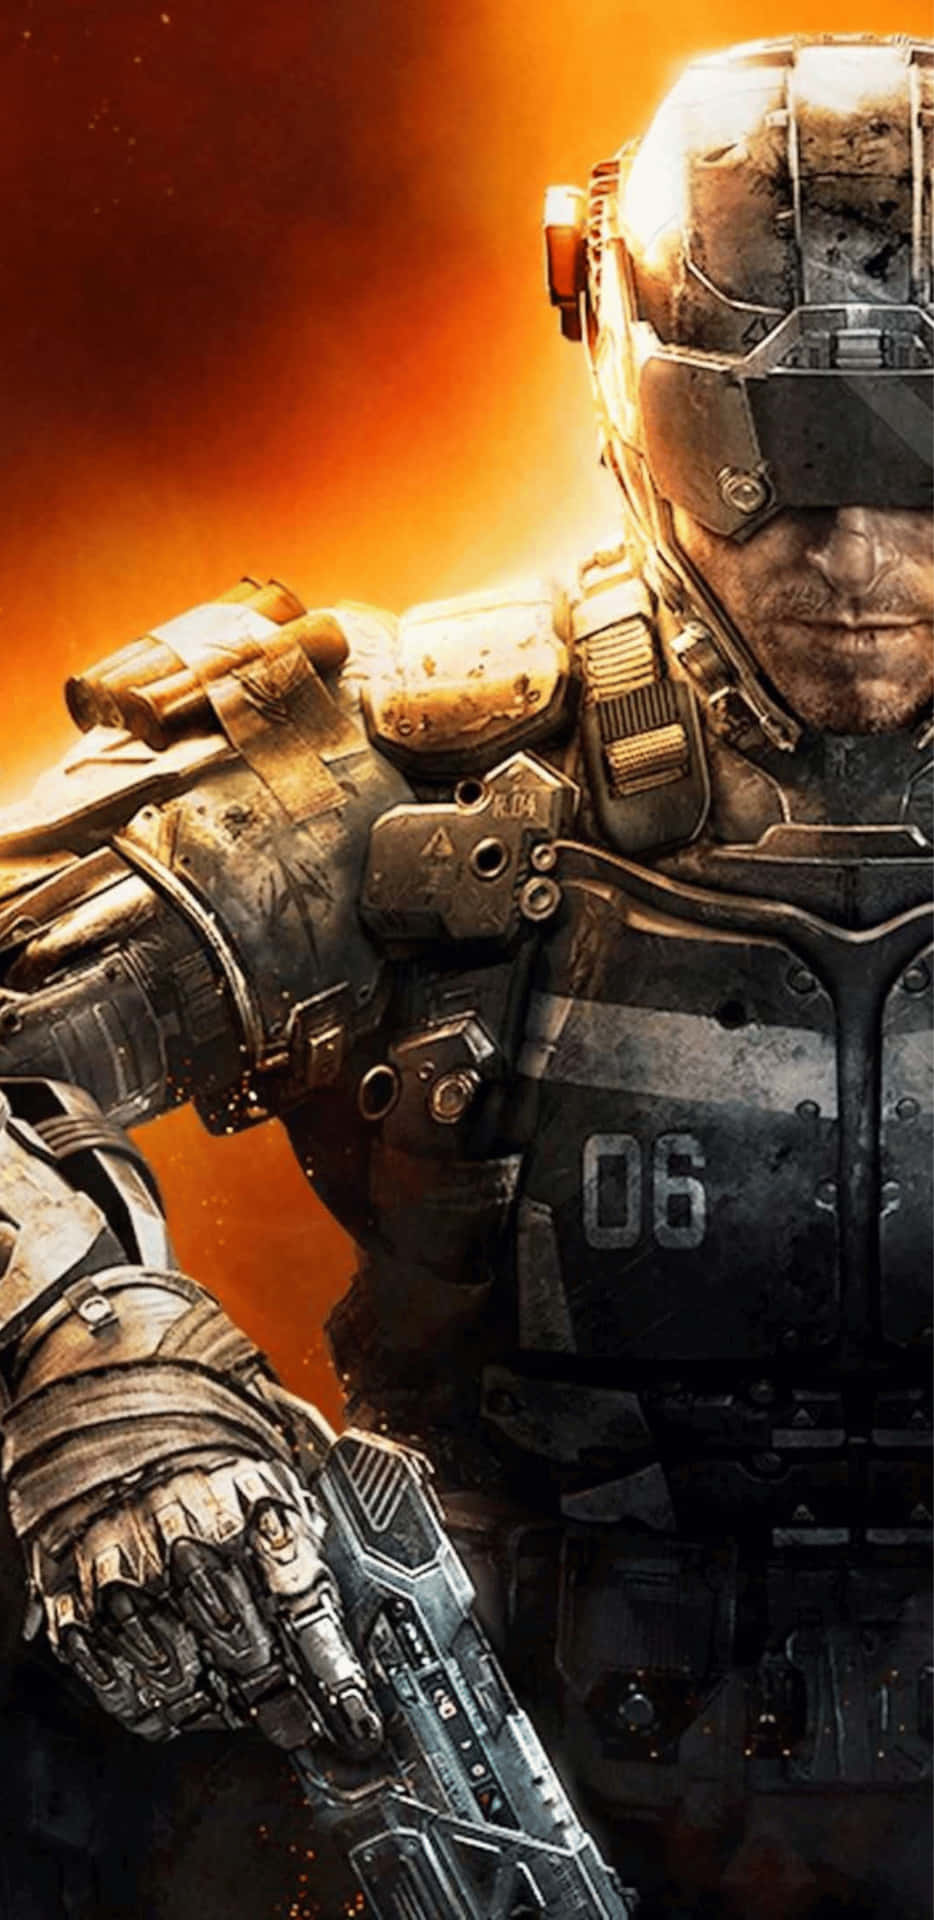 "Experience the ultimate gaming thrill with Pixel 3xl and Call Of Duty Black Ops 4"